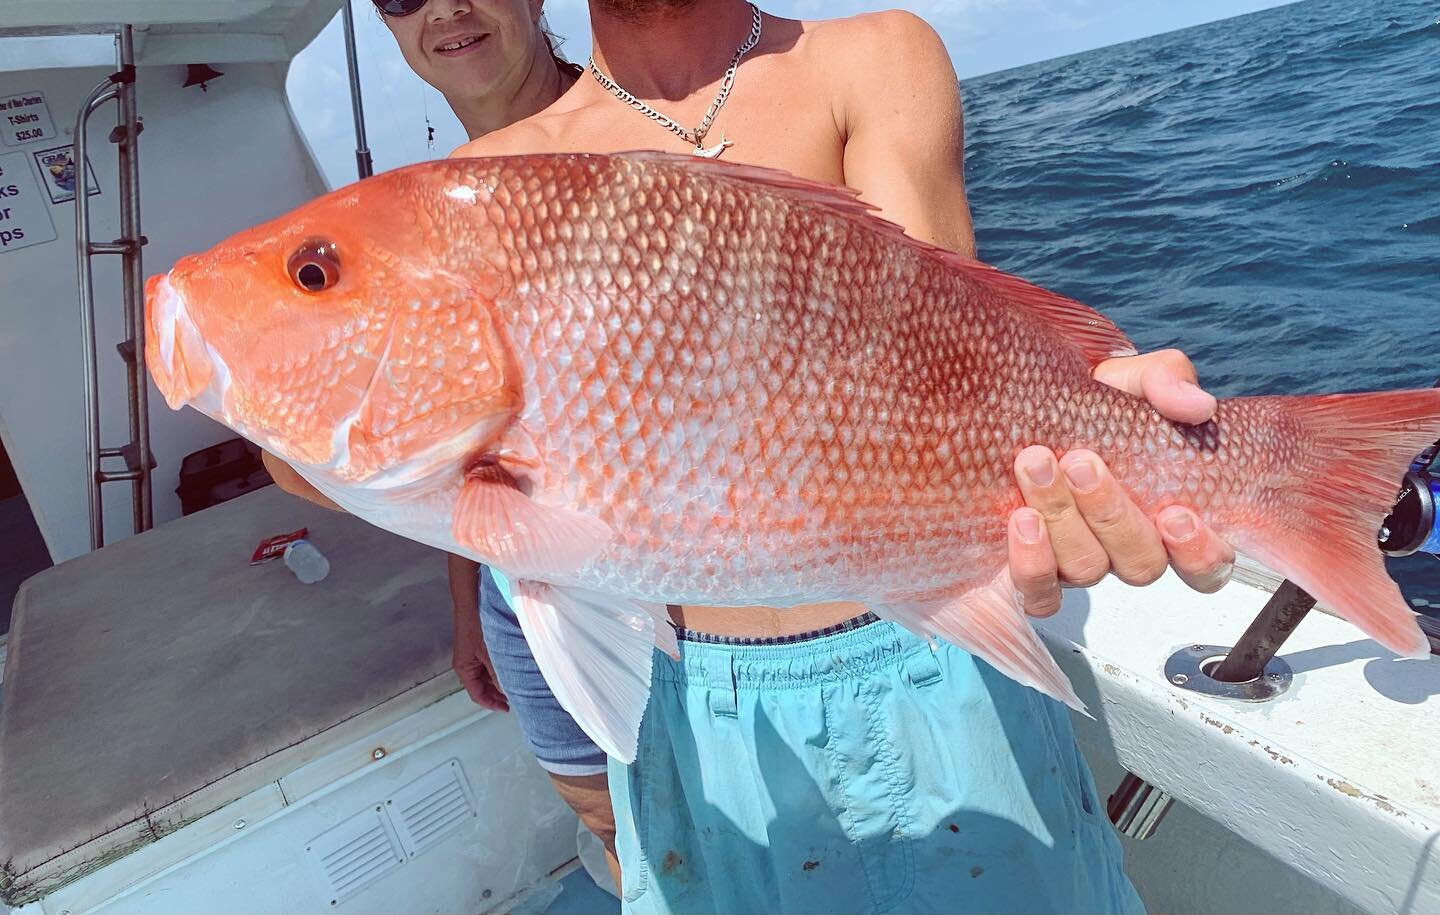 The 3 day 2021 recreational Red Snapper season was open this weekend.  We were able to retain 1 per person so these guys were fortunate to have booked their trip during the opening. We had a blast!